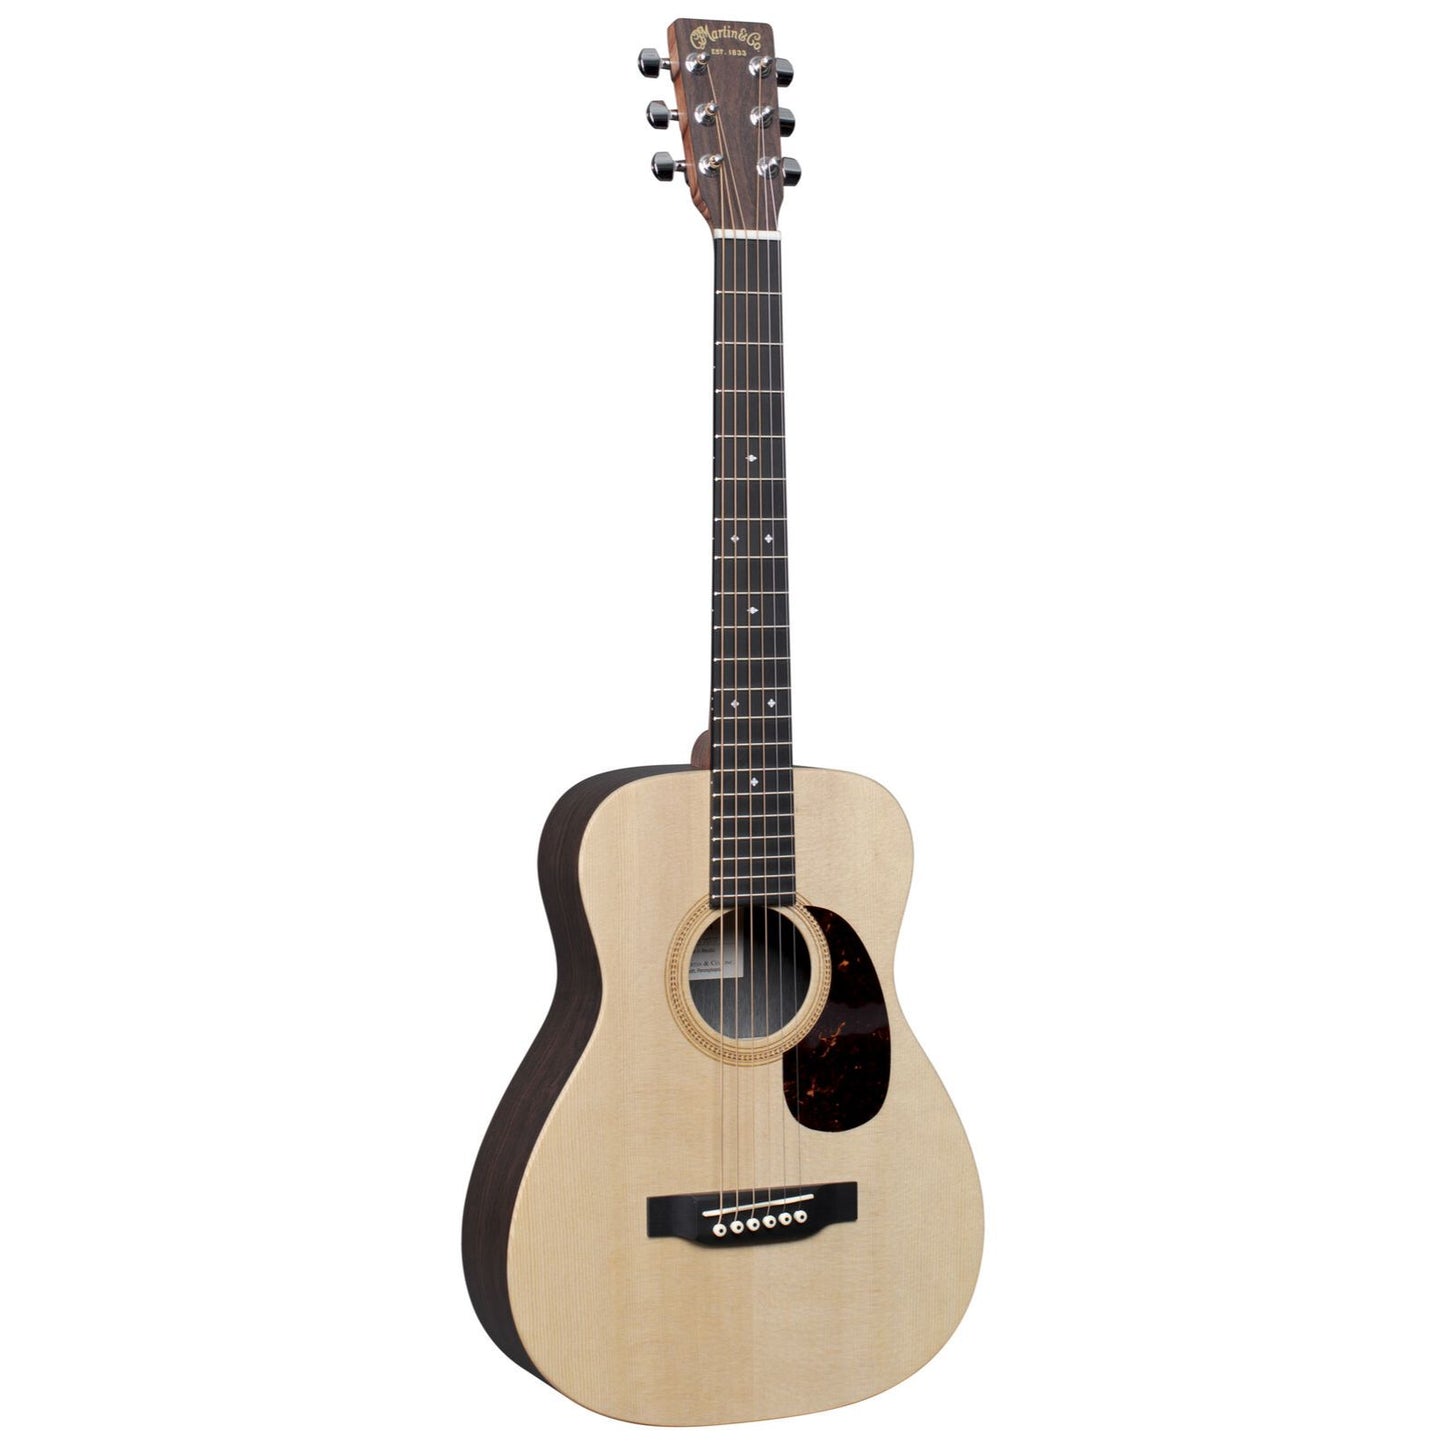 Martin LX1RE "Little Martin" Acoustic Electric Guitar